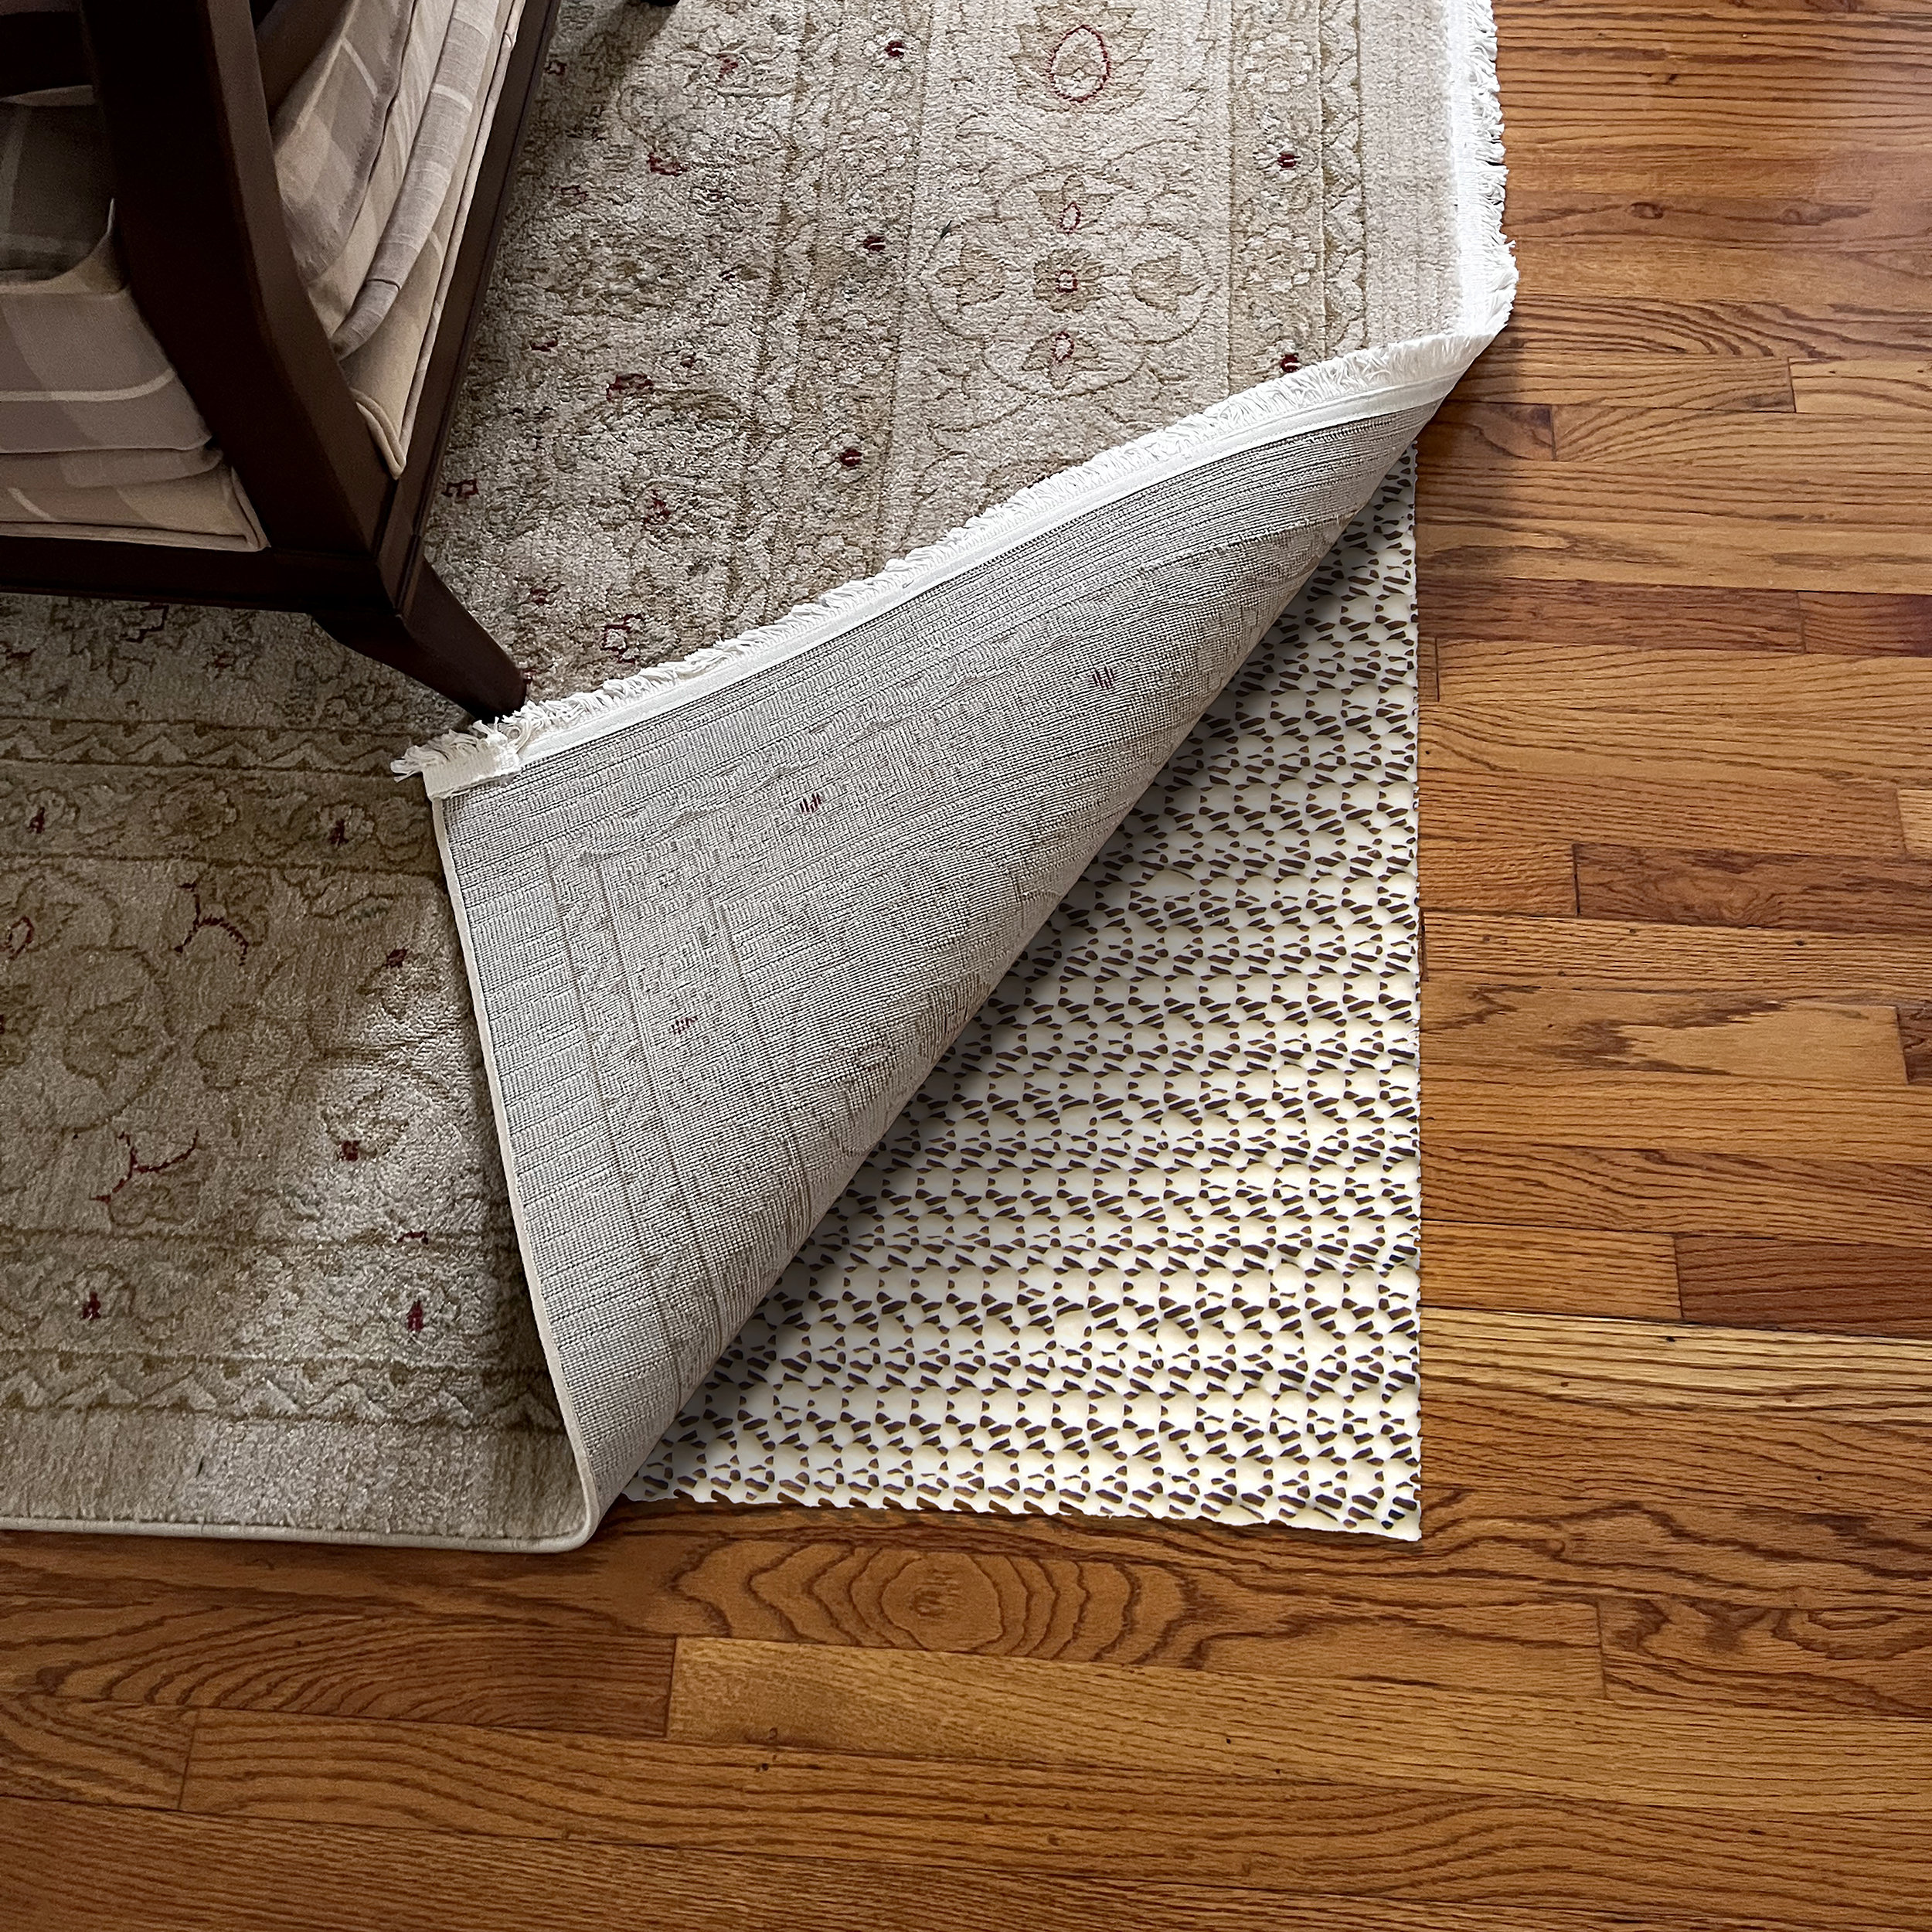 JANSION Non Slip Rug Pad,Non-Slip Grip Mat for Area Rugs, Gripper Extra  Thick Pad for Any Hard Surface Floors 